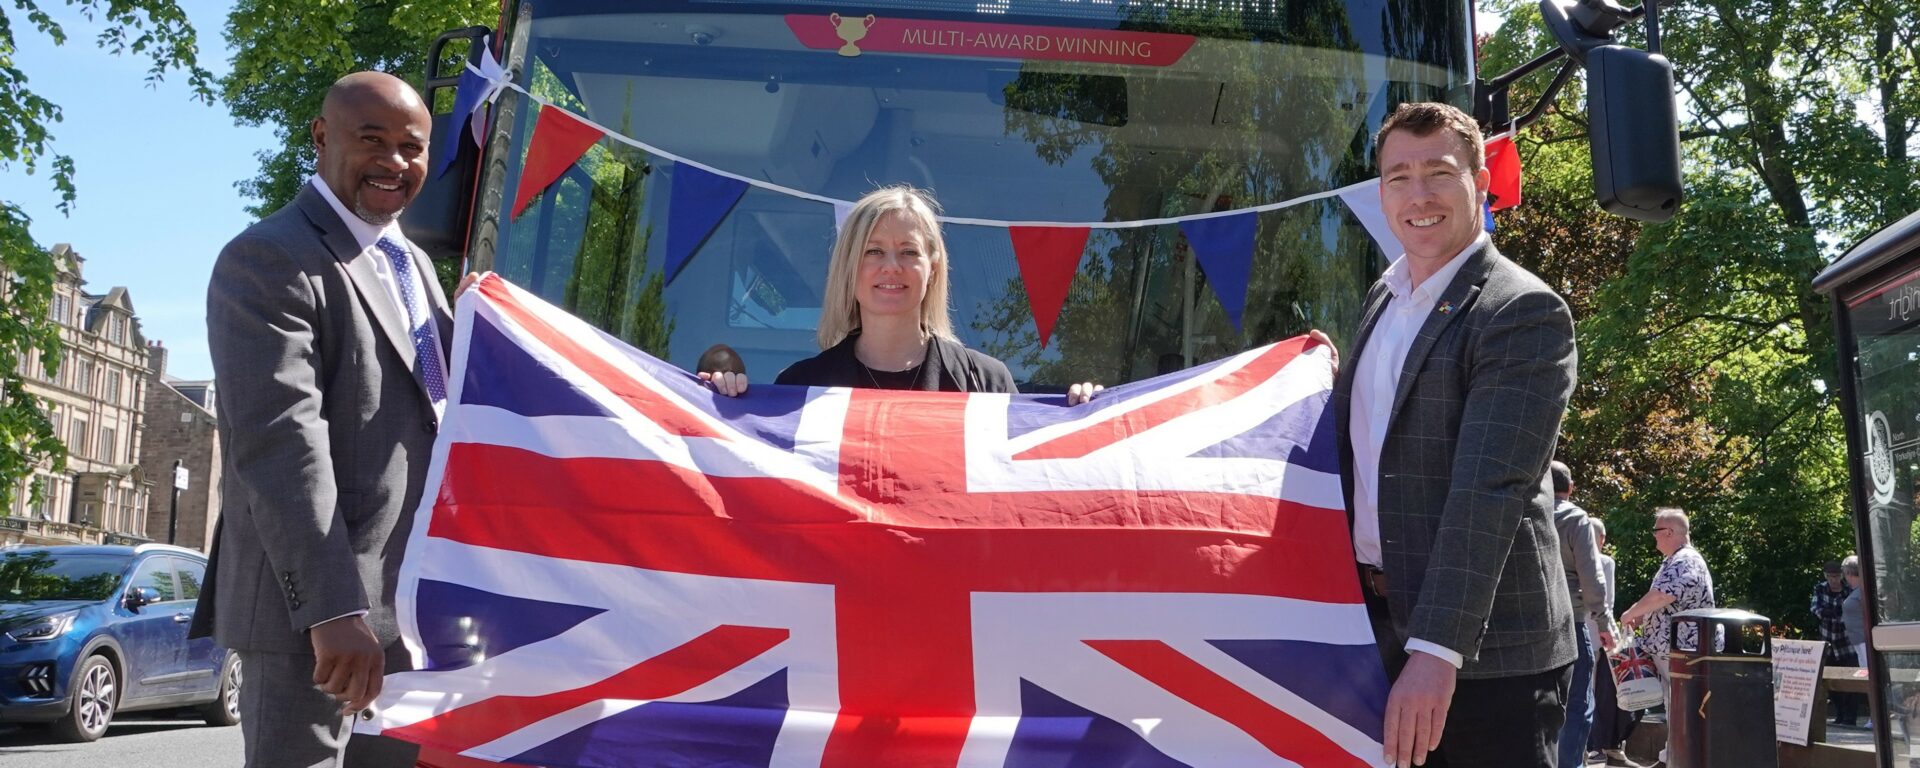 Transdev’s subsidiary in the UK, the Harrogate Bus Company teamed up with Harrogate Business Improvement District (BID) to run free electric buses throughout HM The Queen’s Platinum Jubilee recent holiday weekend